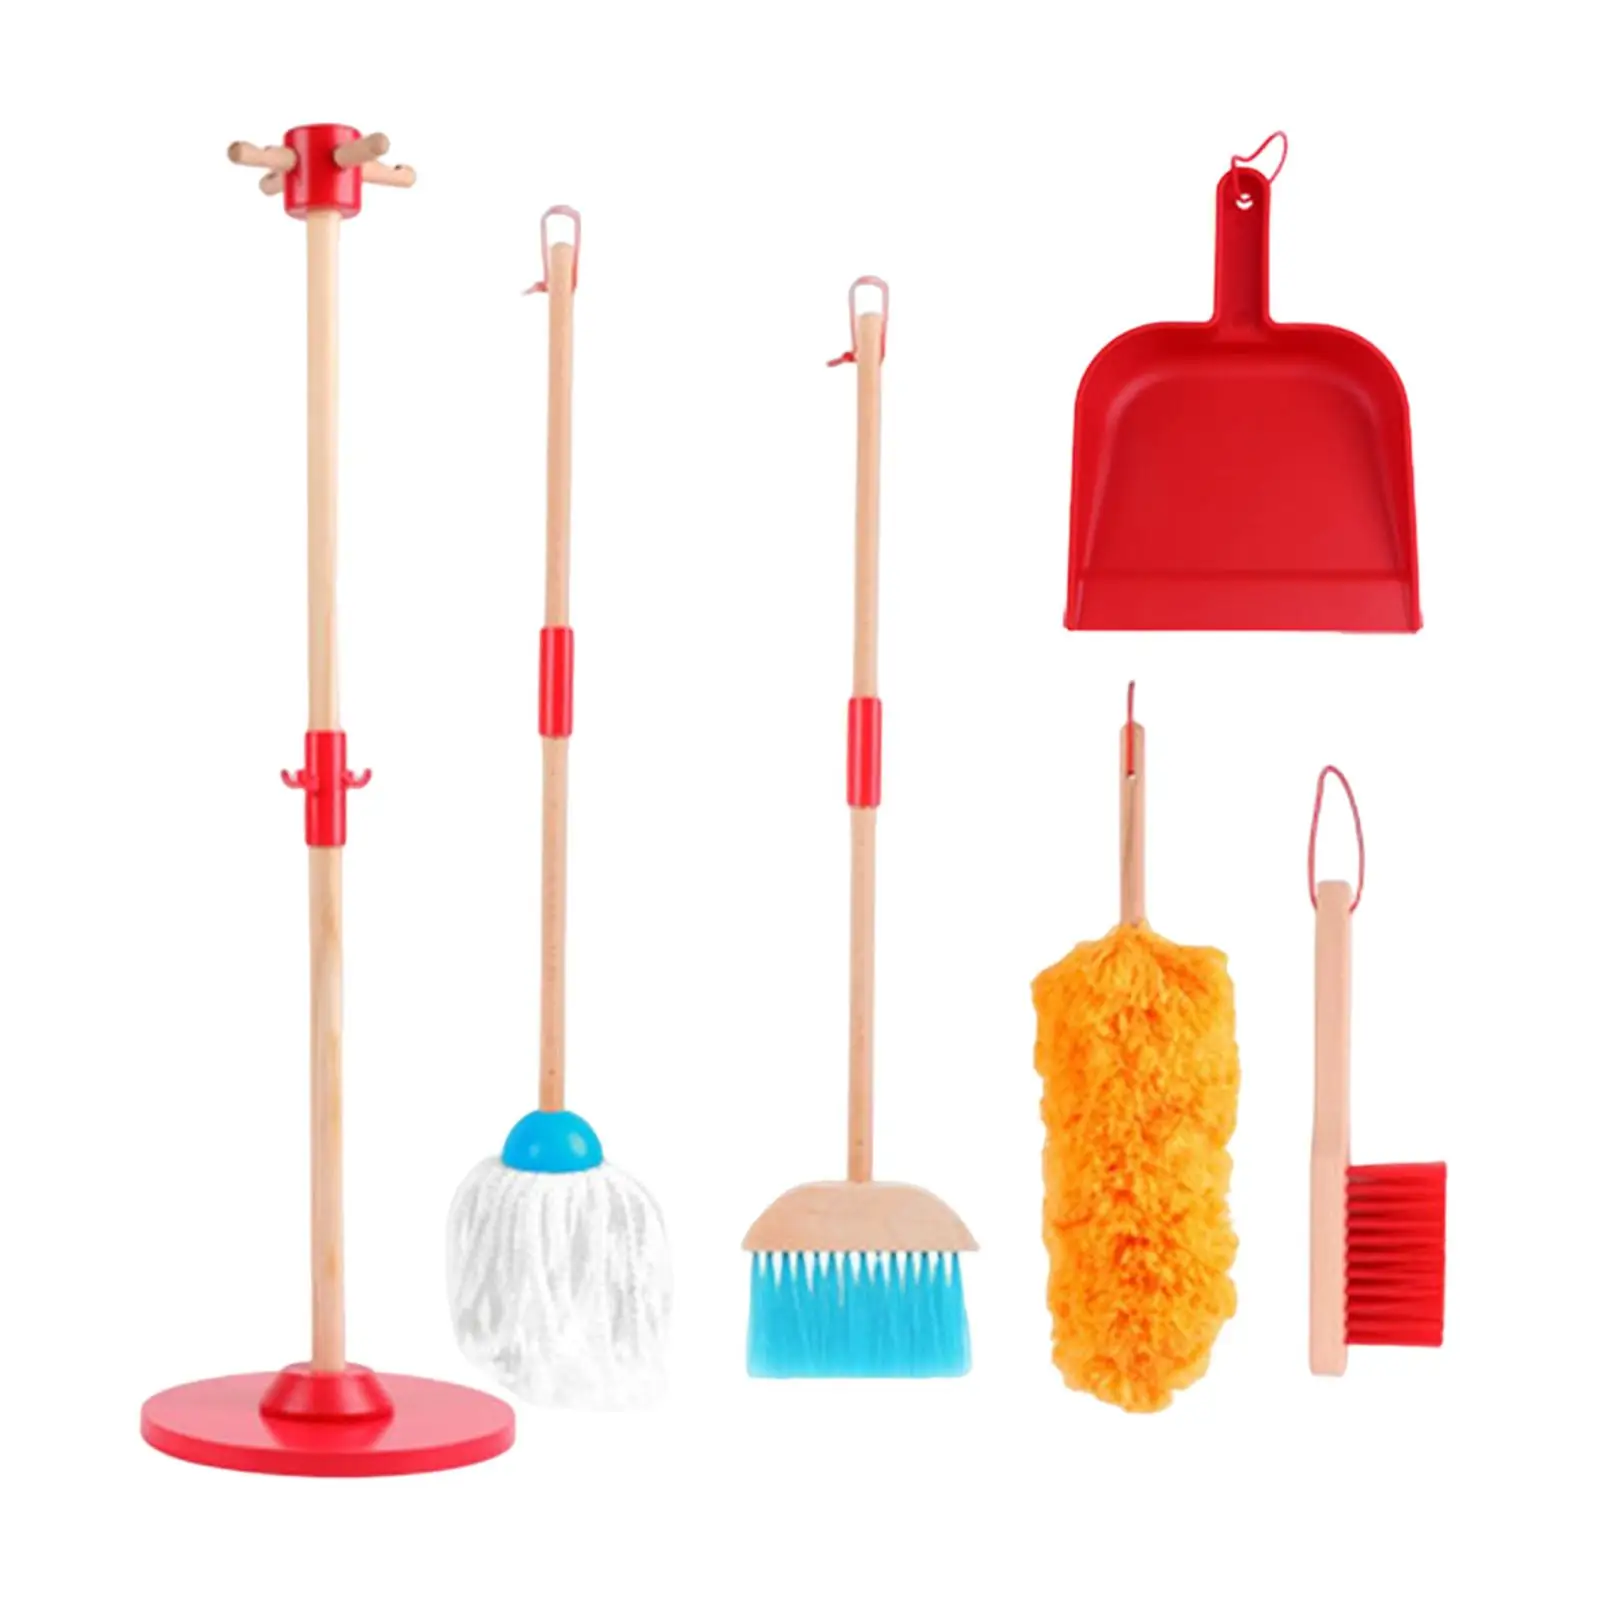 6Pcs Chidlren Housekeeping Cleaning Set Pretend Play Toy Accessories Educational Toy for Girls Boys Age 3-6 Birthday Gifts